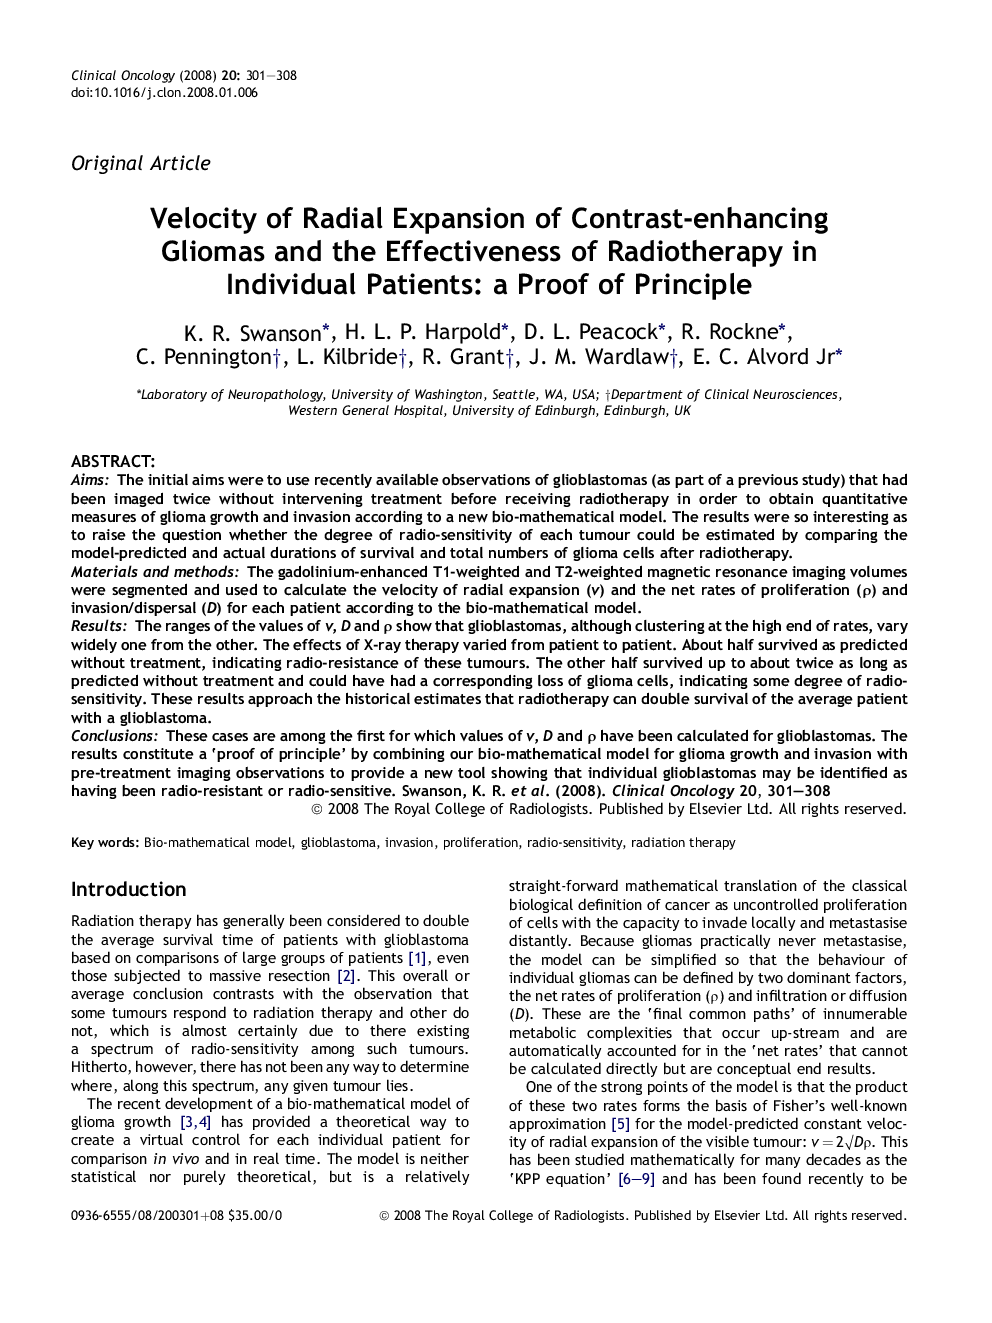 Velocity of Radial Expansion of Contrast-enhancing Gliomas and the Effectiveness of Radiotherapy in Individual Patients: a Proof of Principle